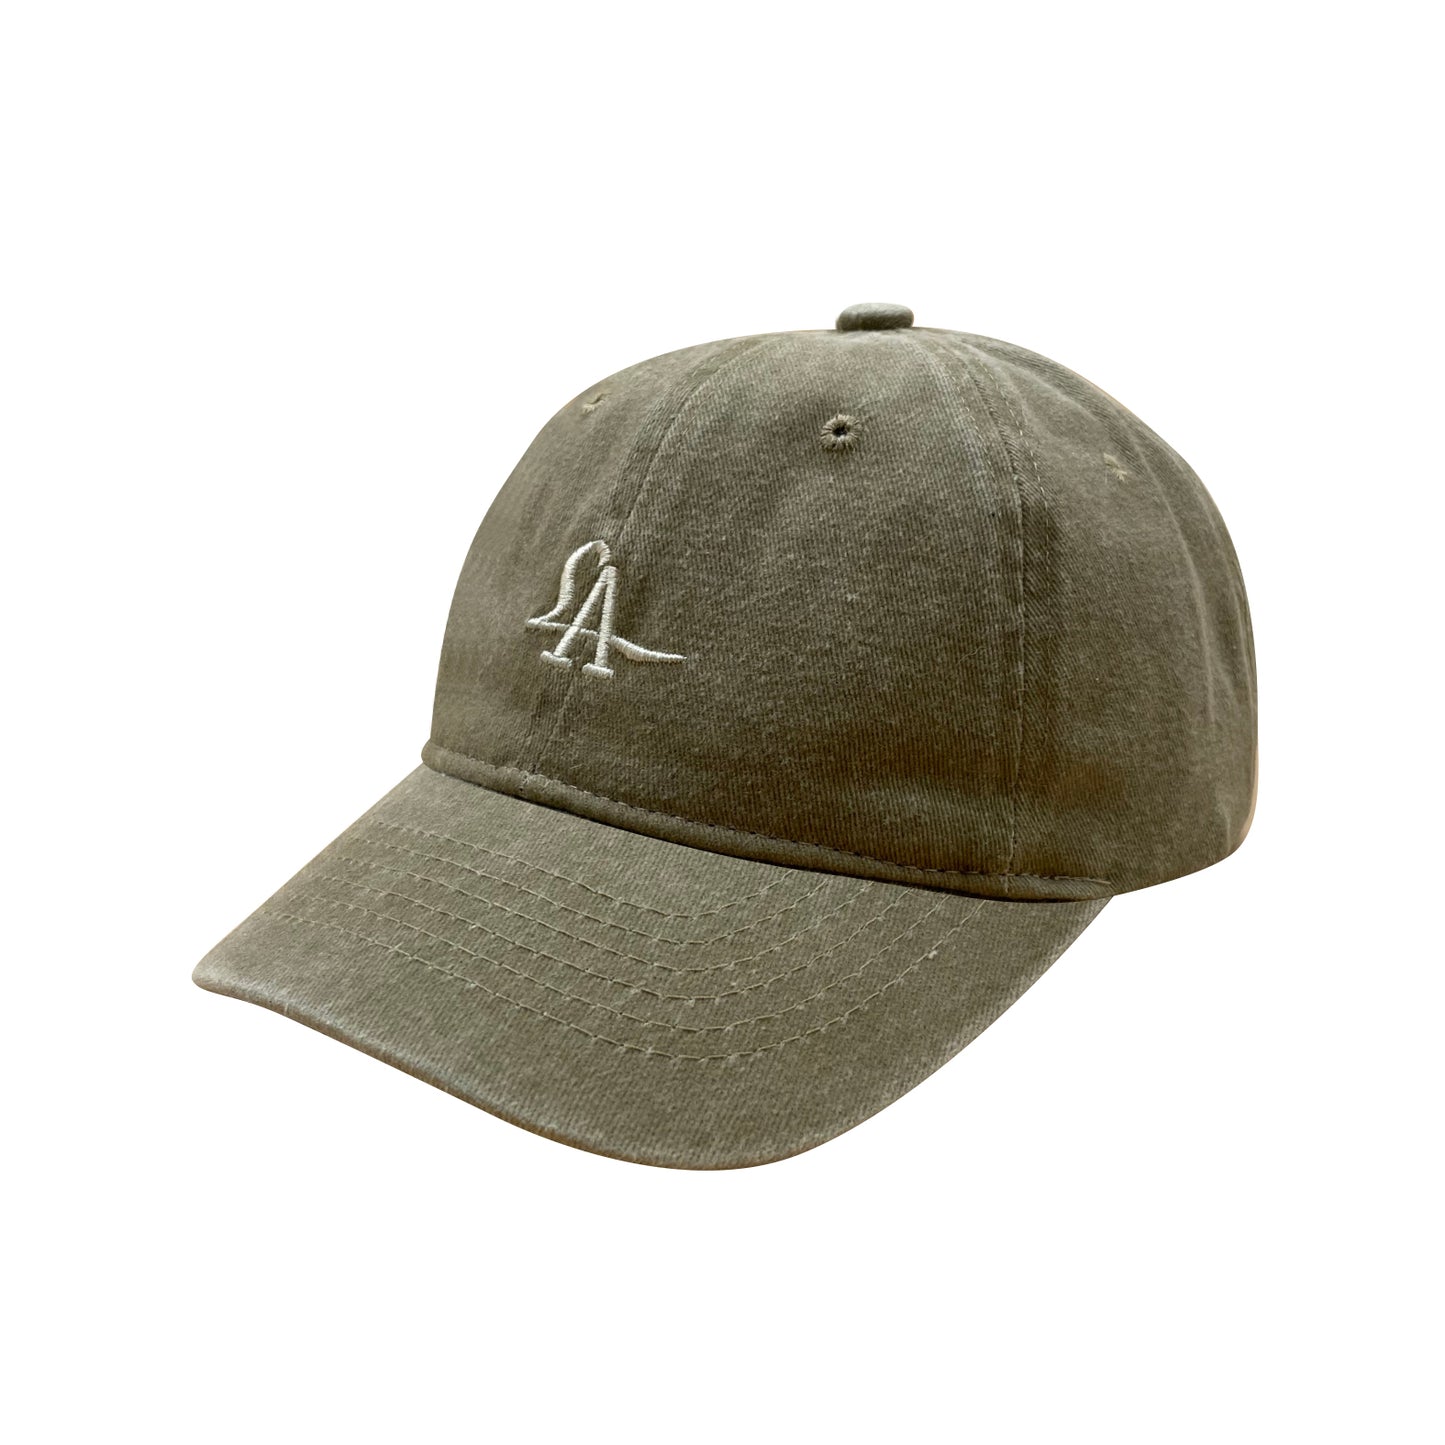 Lust Angeles cap in washed army green